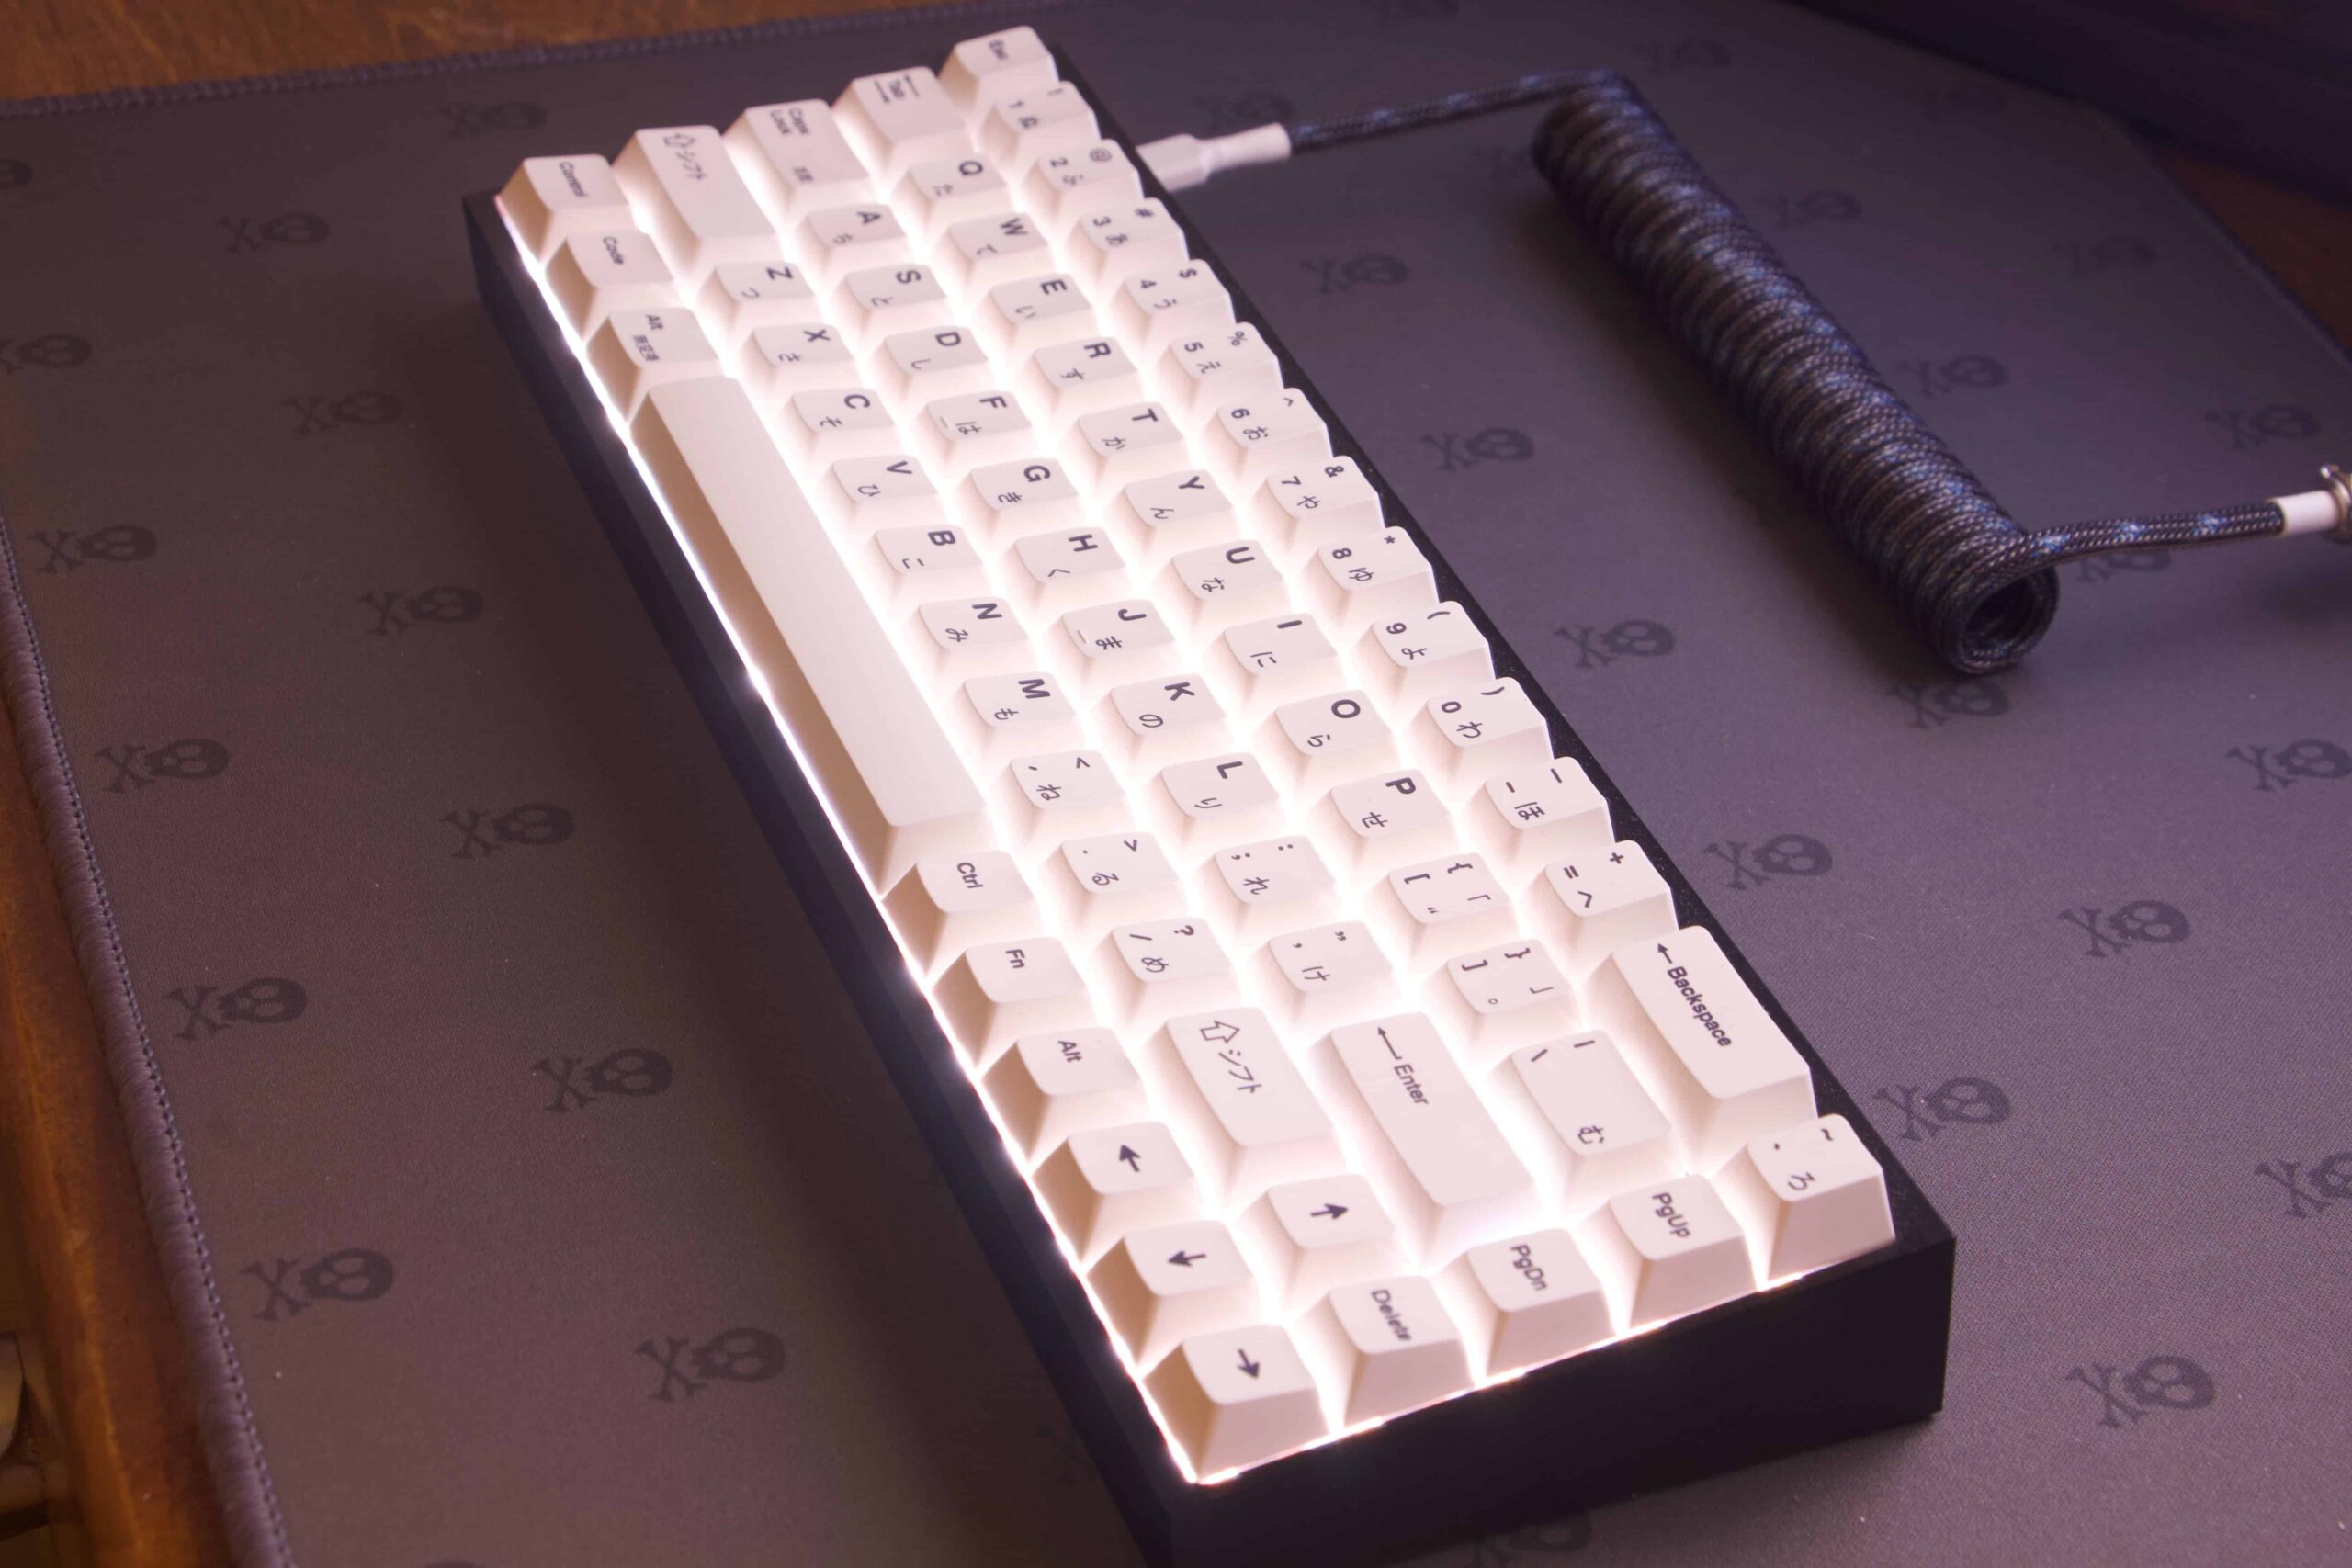 Are Mechanical Keyboards Good or Bad for Your Fingers?